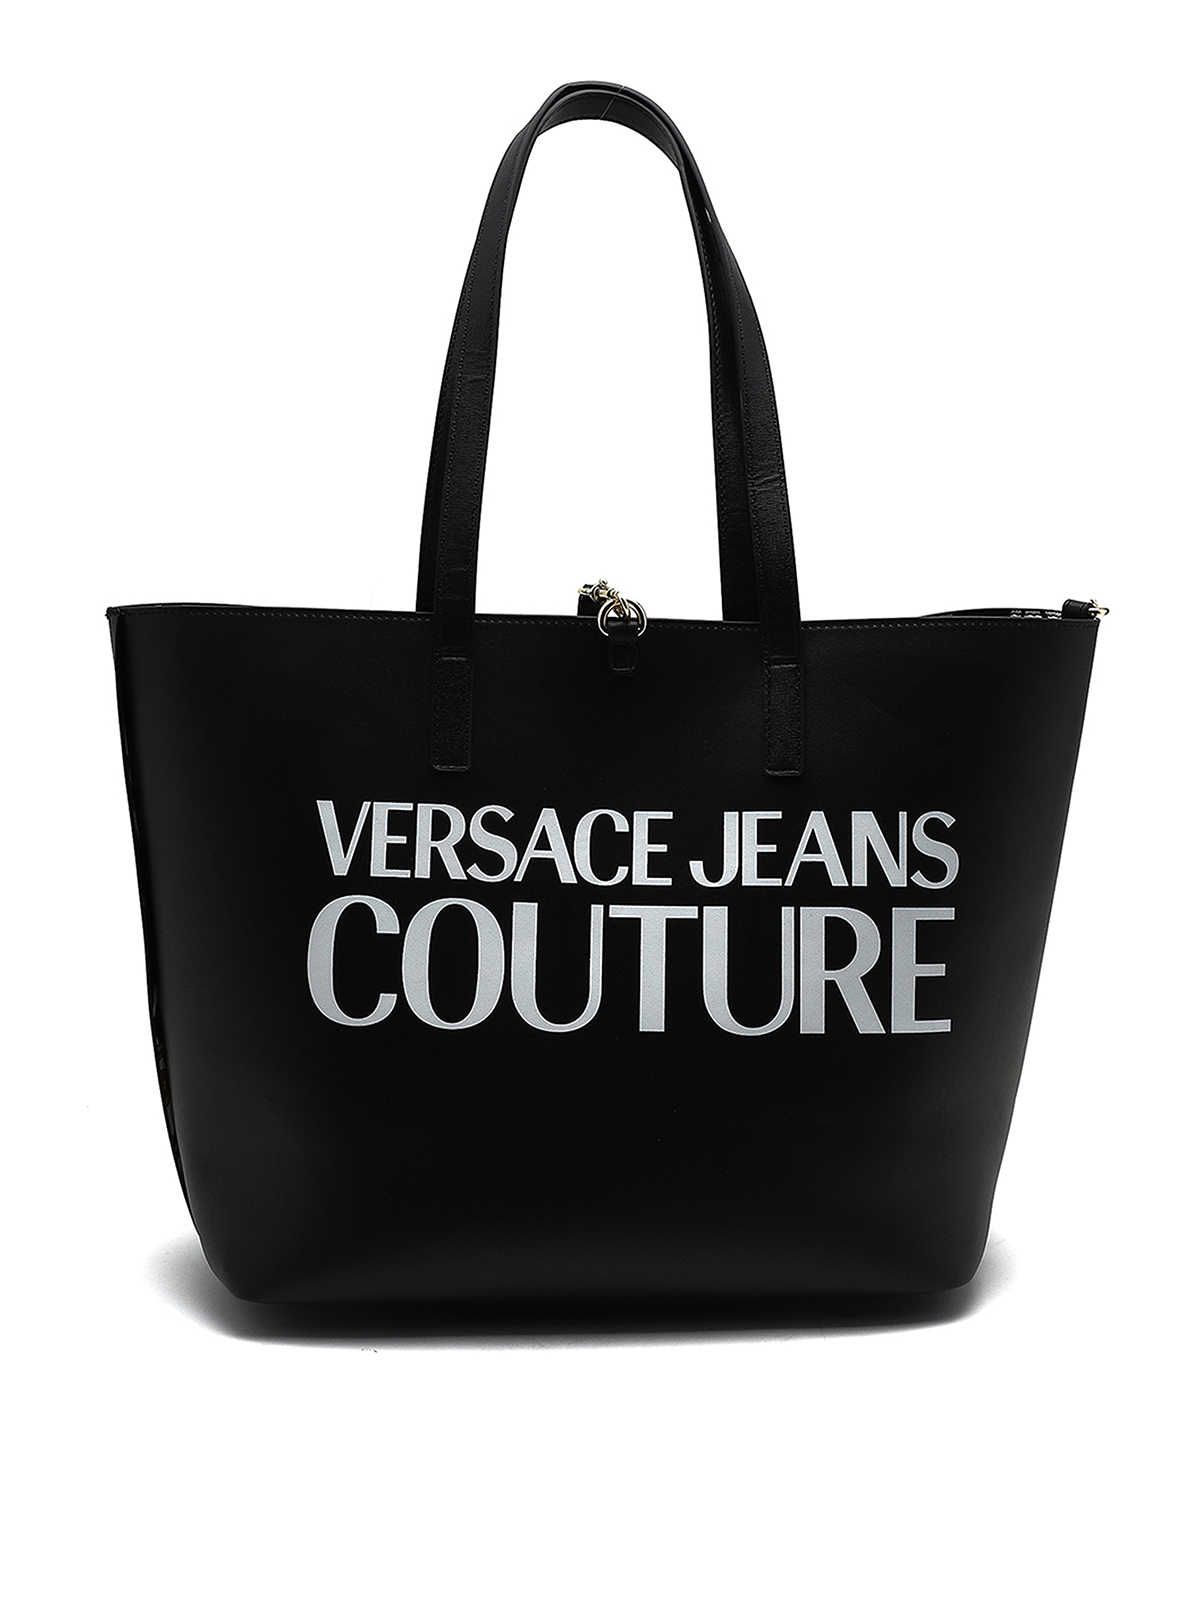 VERSACE JEANS COUTURE トートバッグ ホワイト バロック